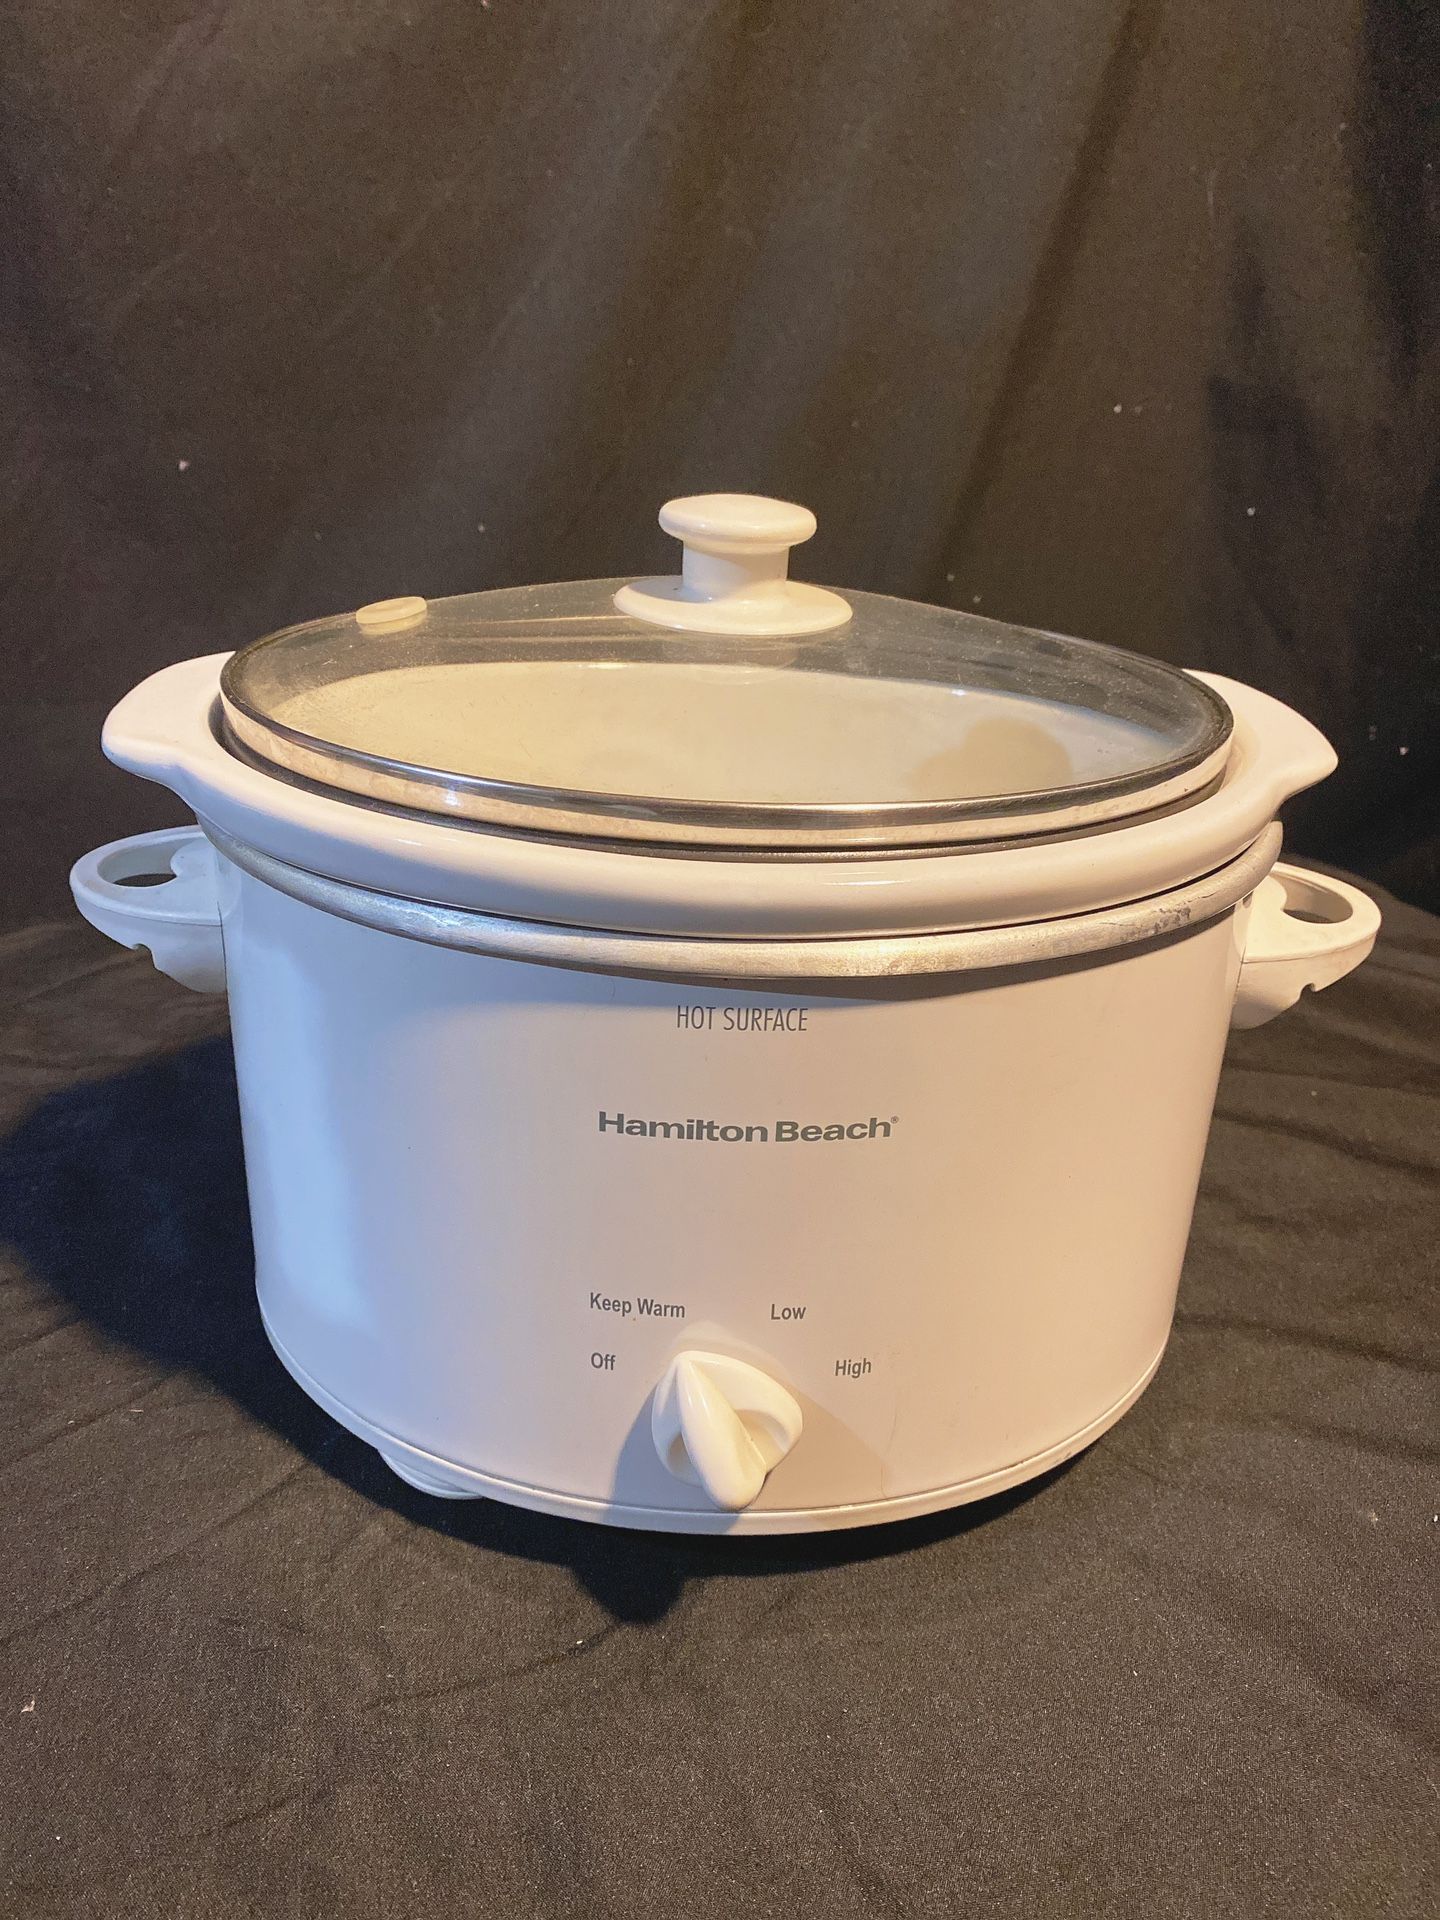 Slow cooker by hamilton beach